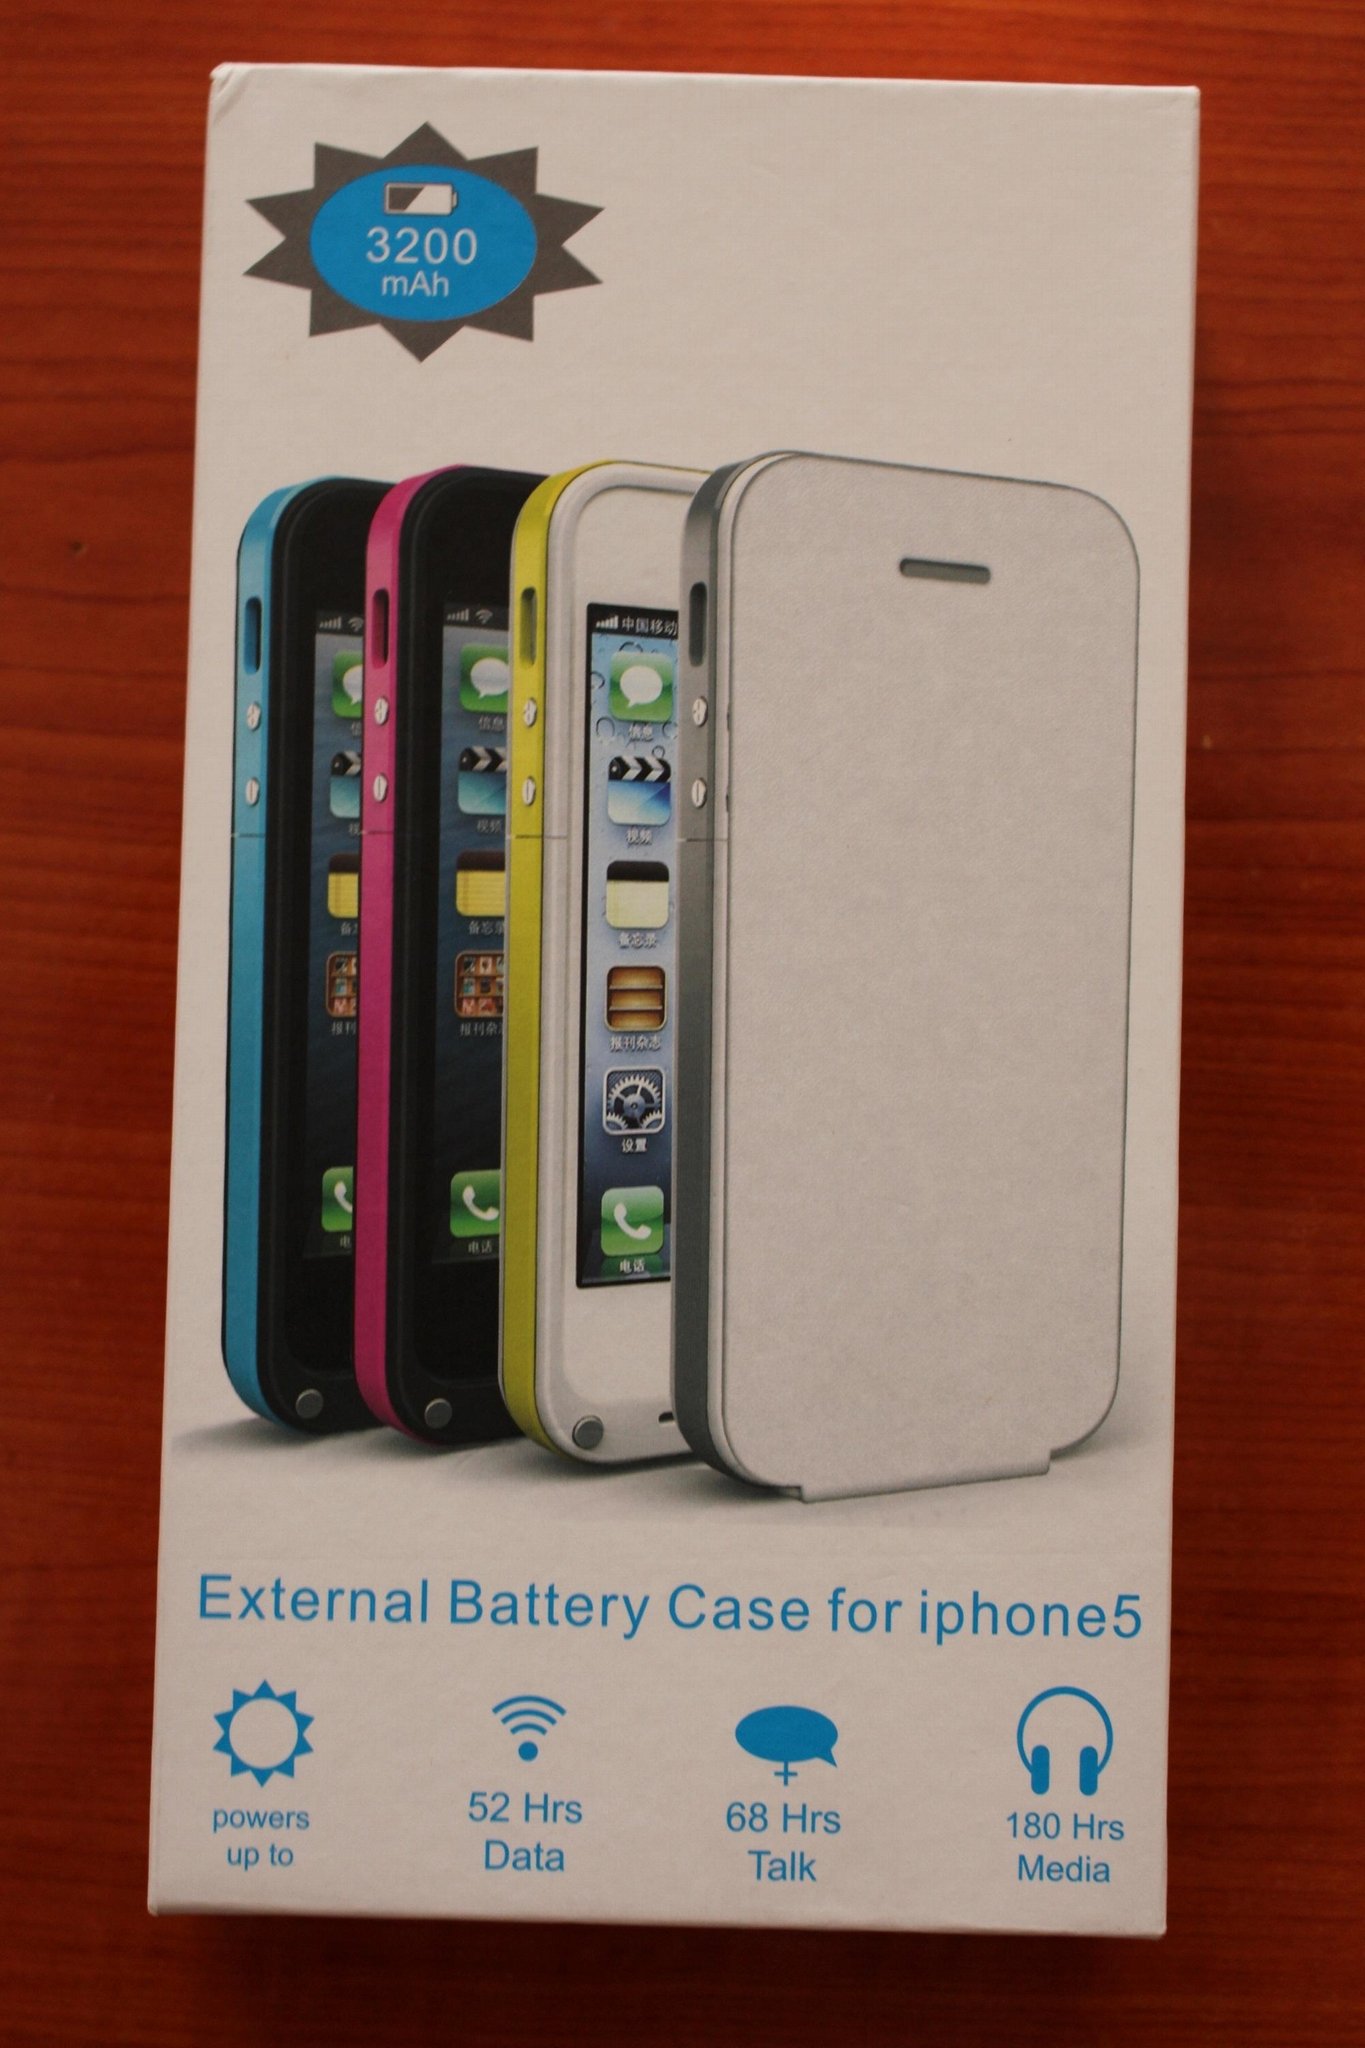 External battery case for iPhone5 3